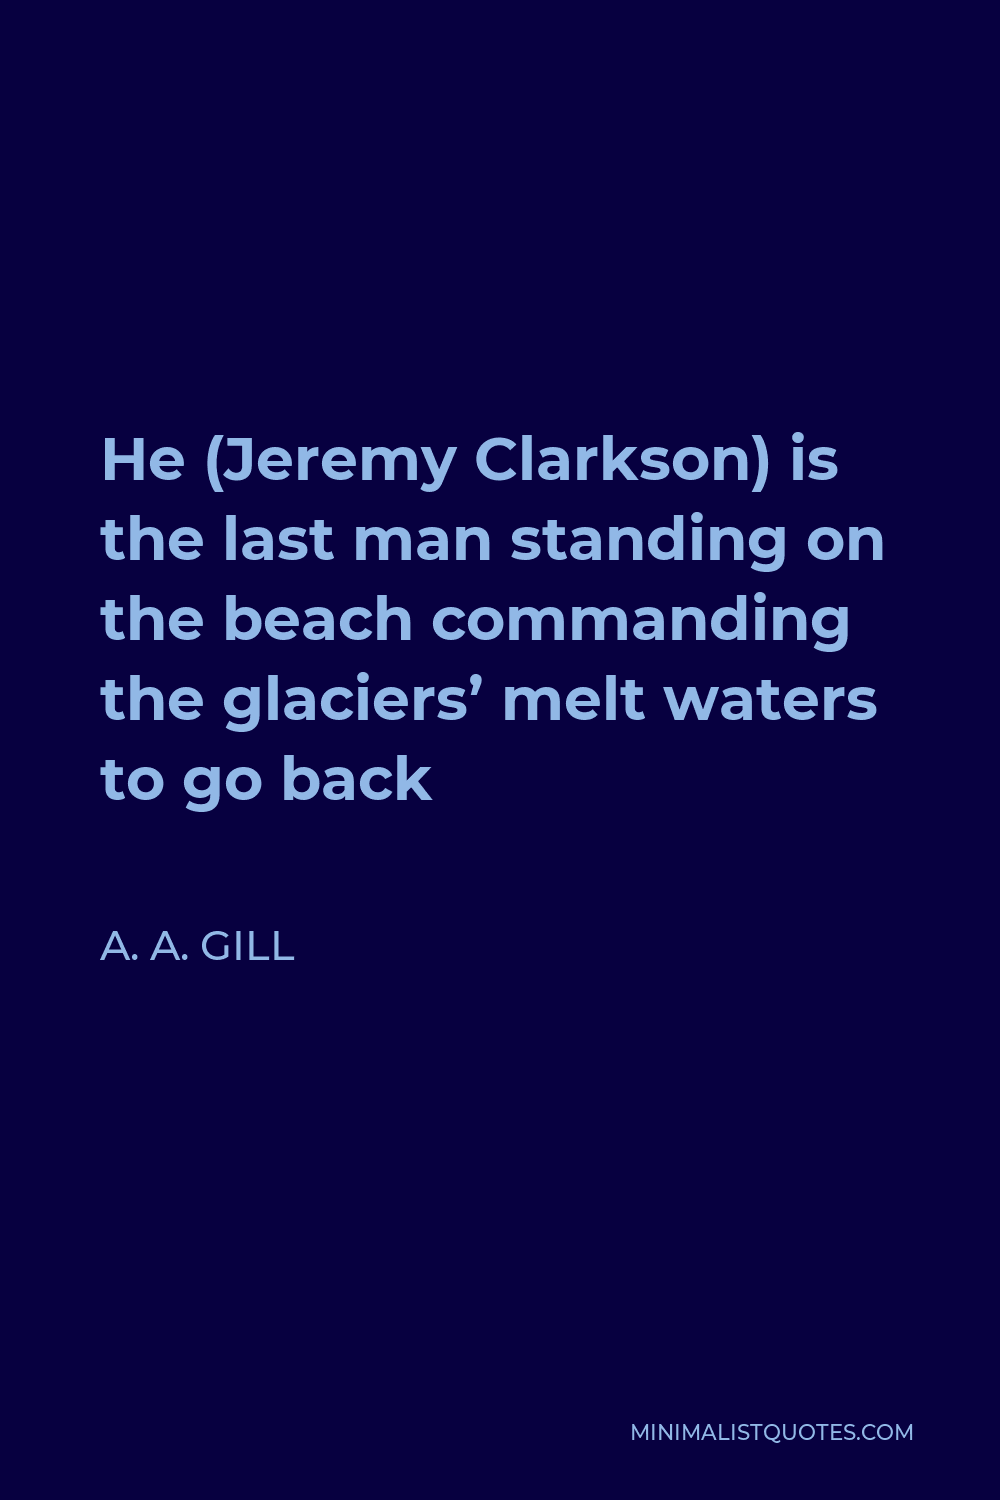 A. A. Gill Quote - He (Jeremy Clarkson) is the last man standing on the beach commanding the glaciers’ melt waters to go back